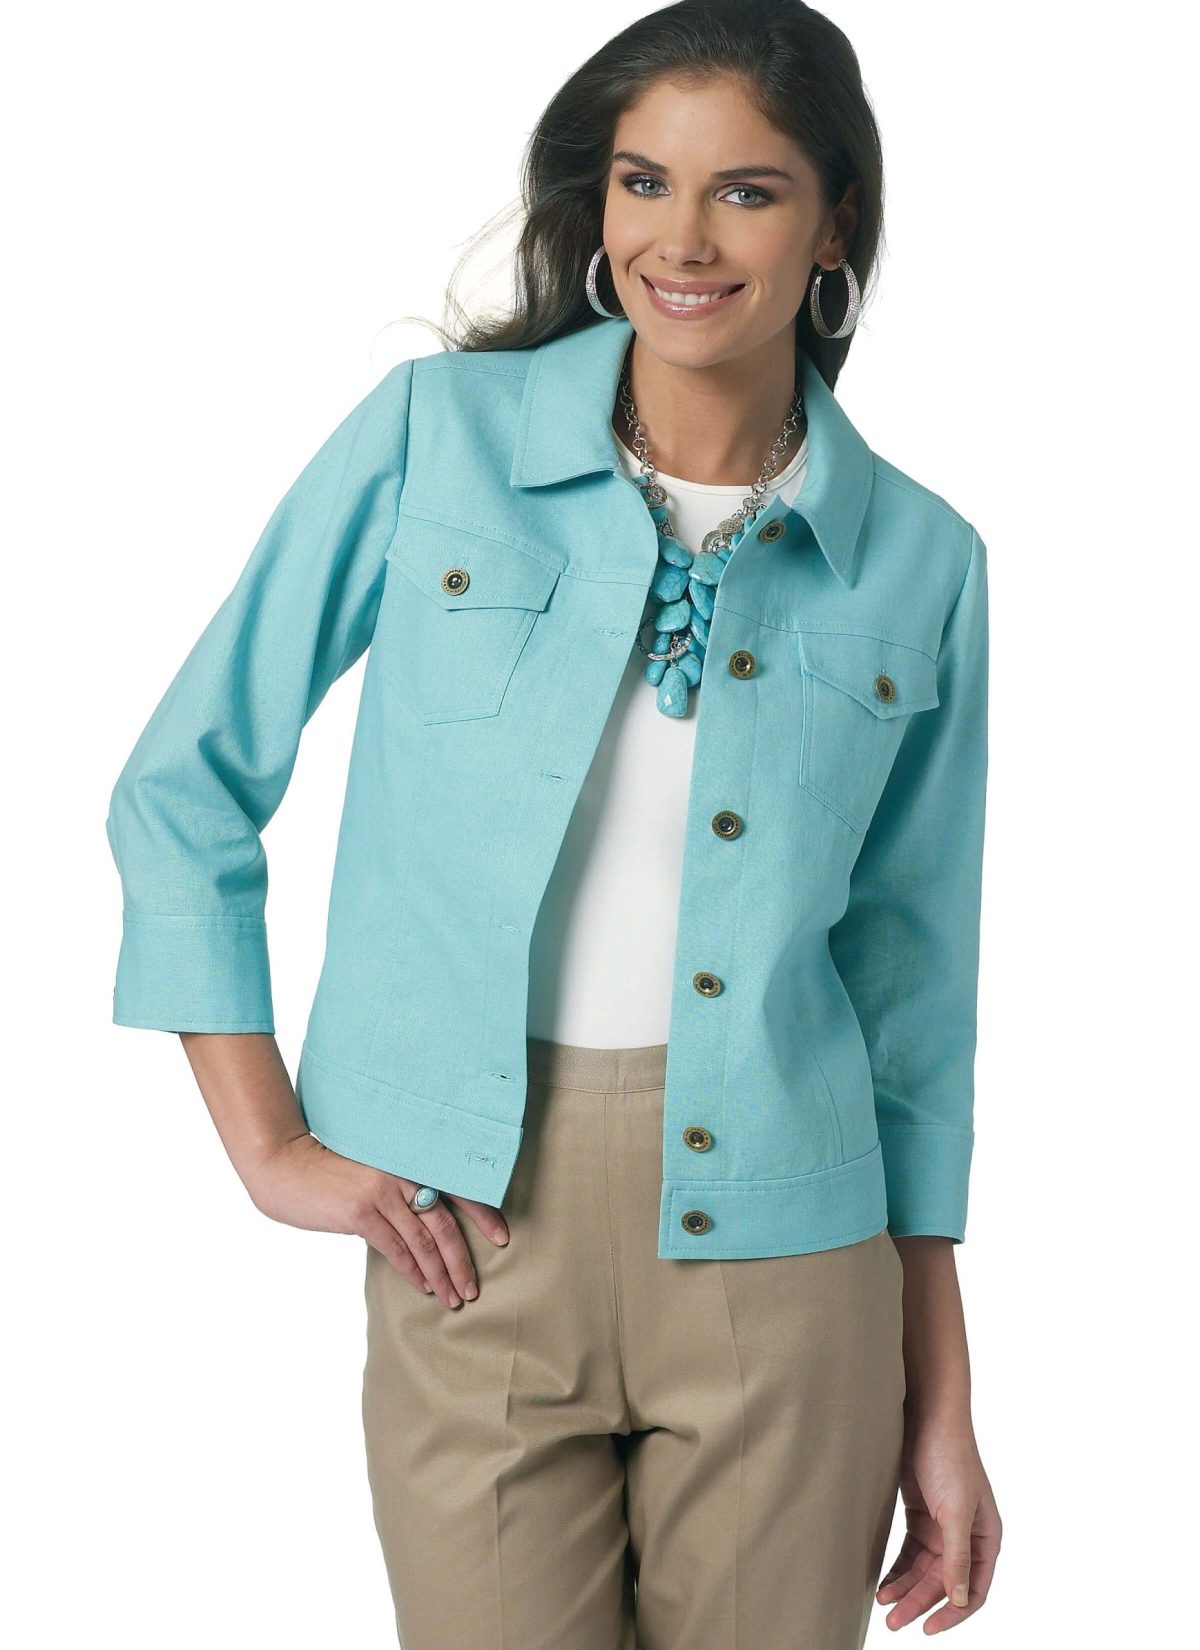 Butterick Sewing Pattern B5616 Misses' Jacket